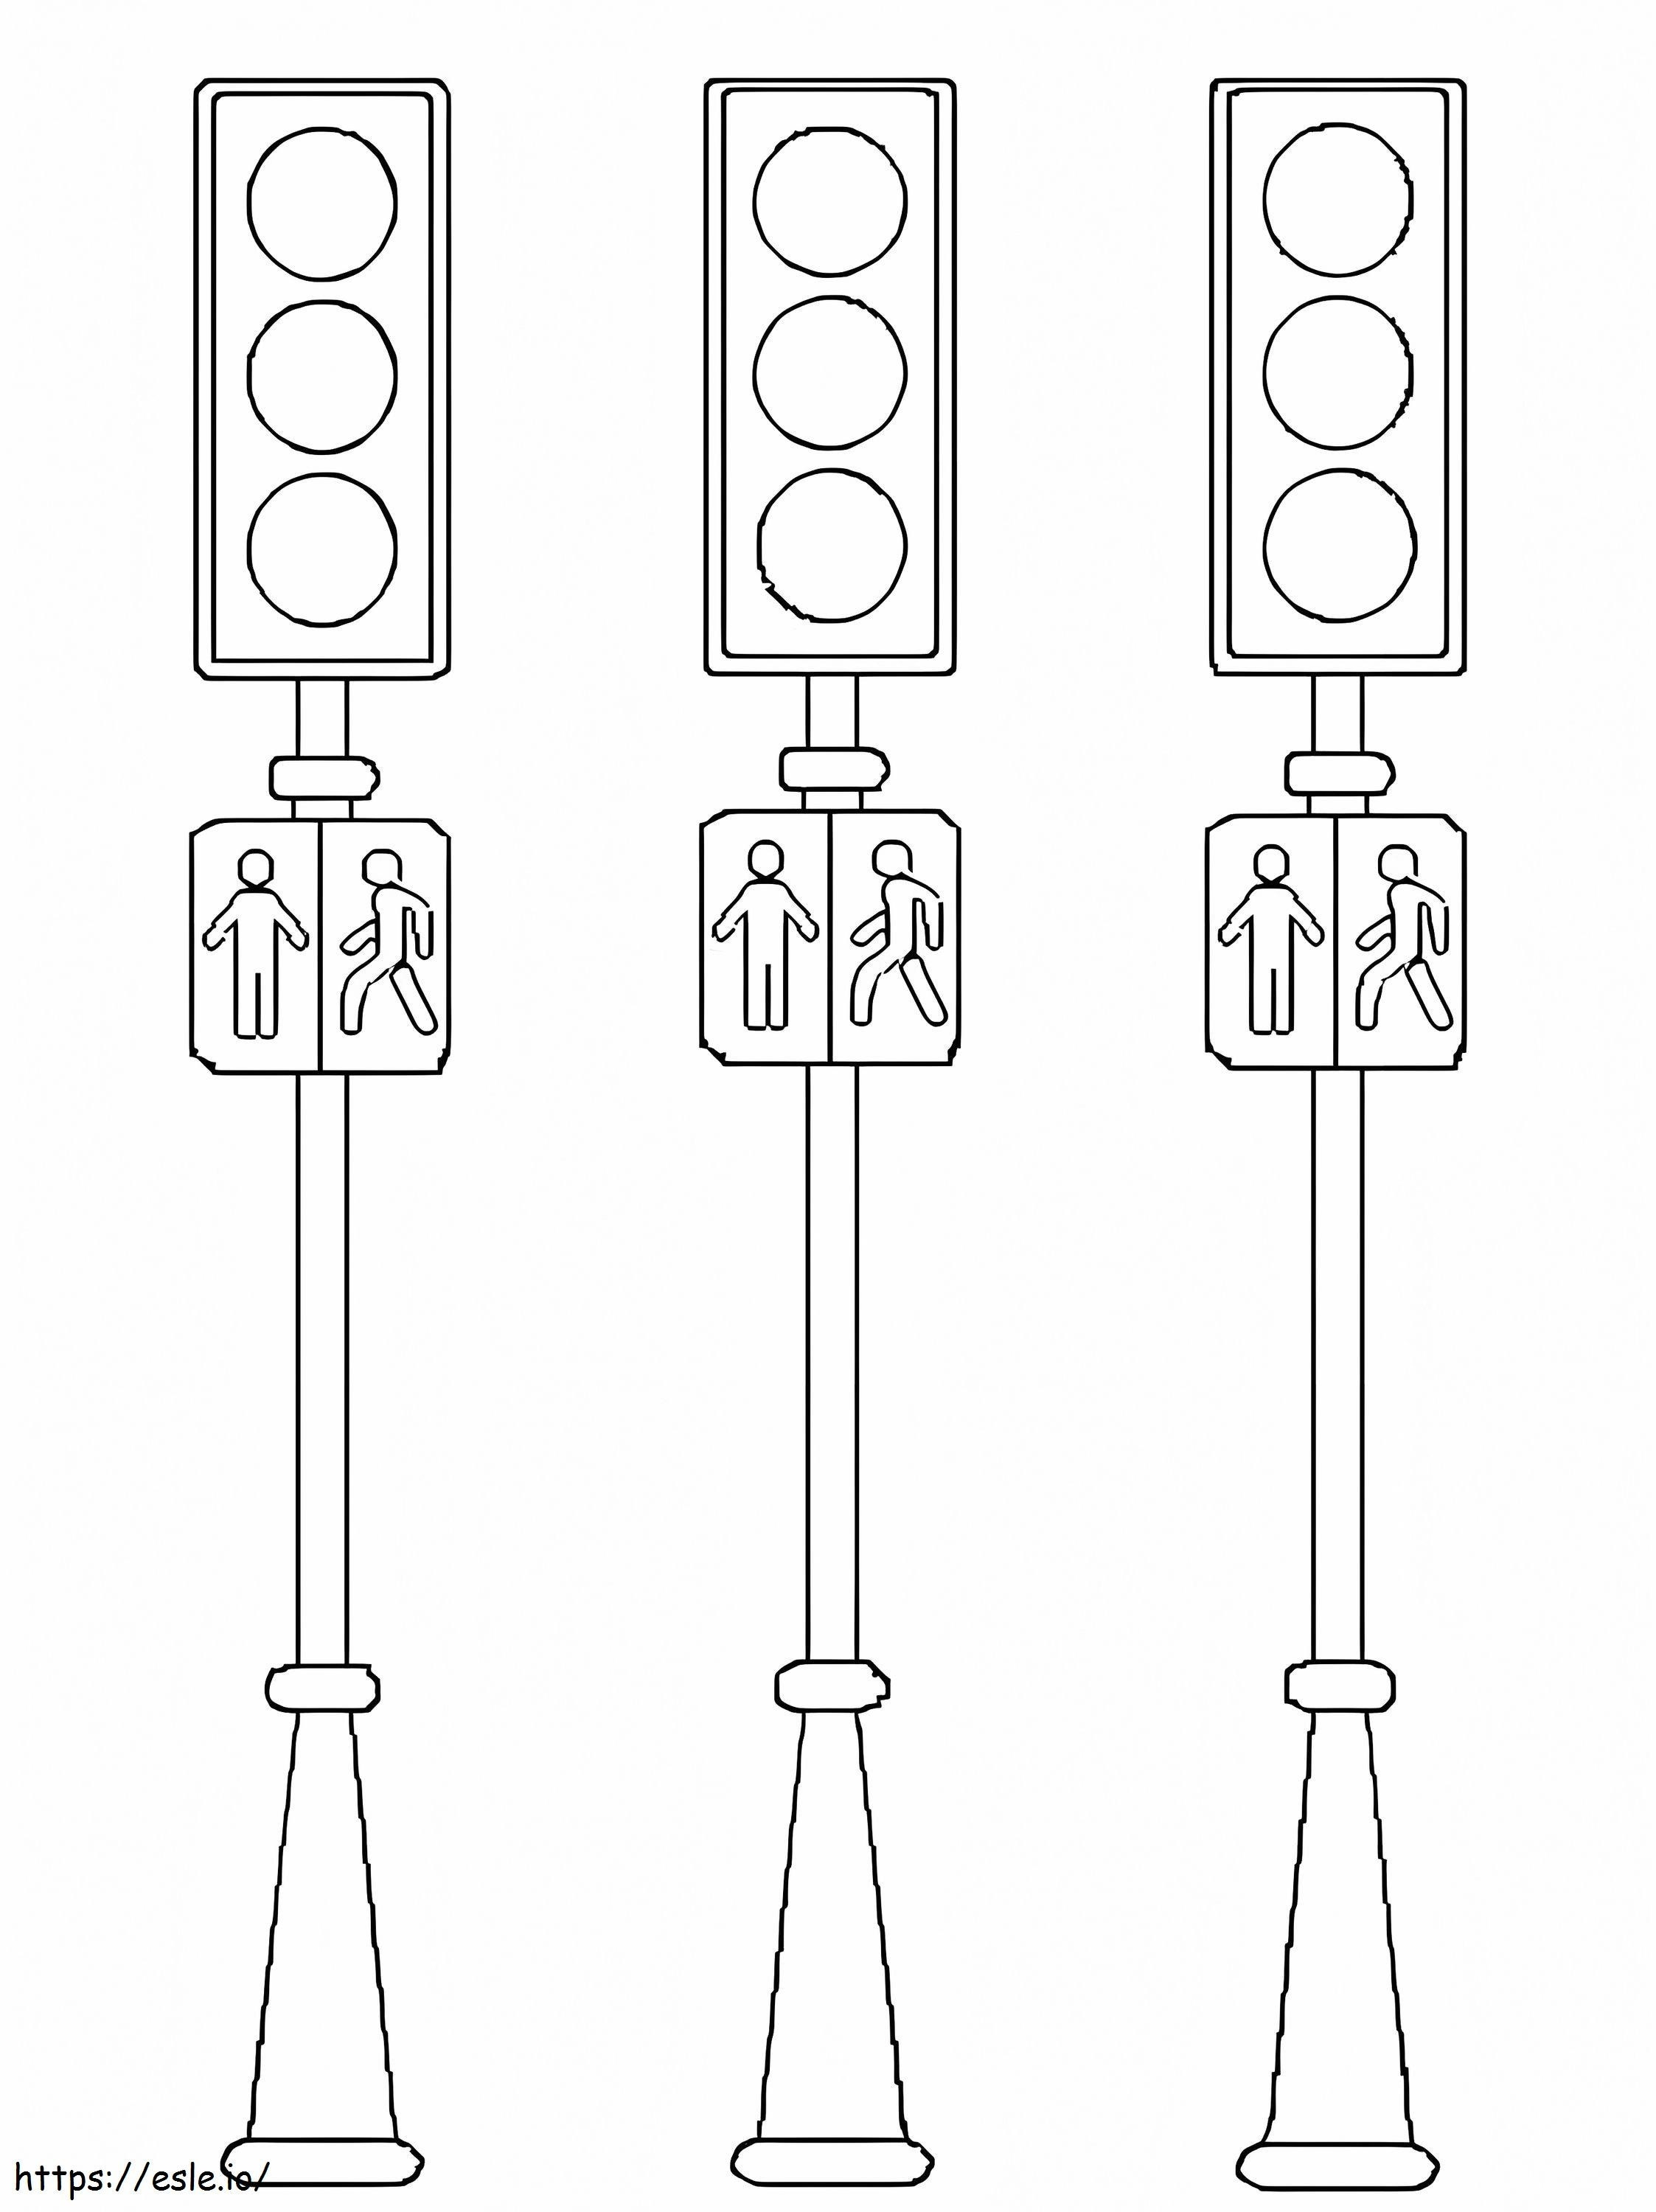 Free Printable Traffic Lights coloring page